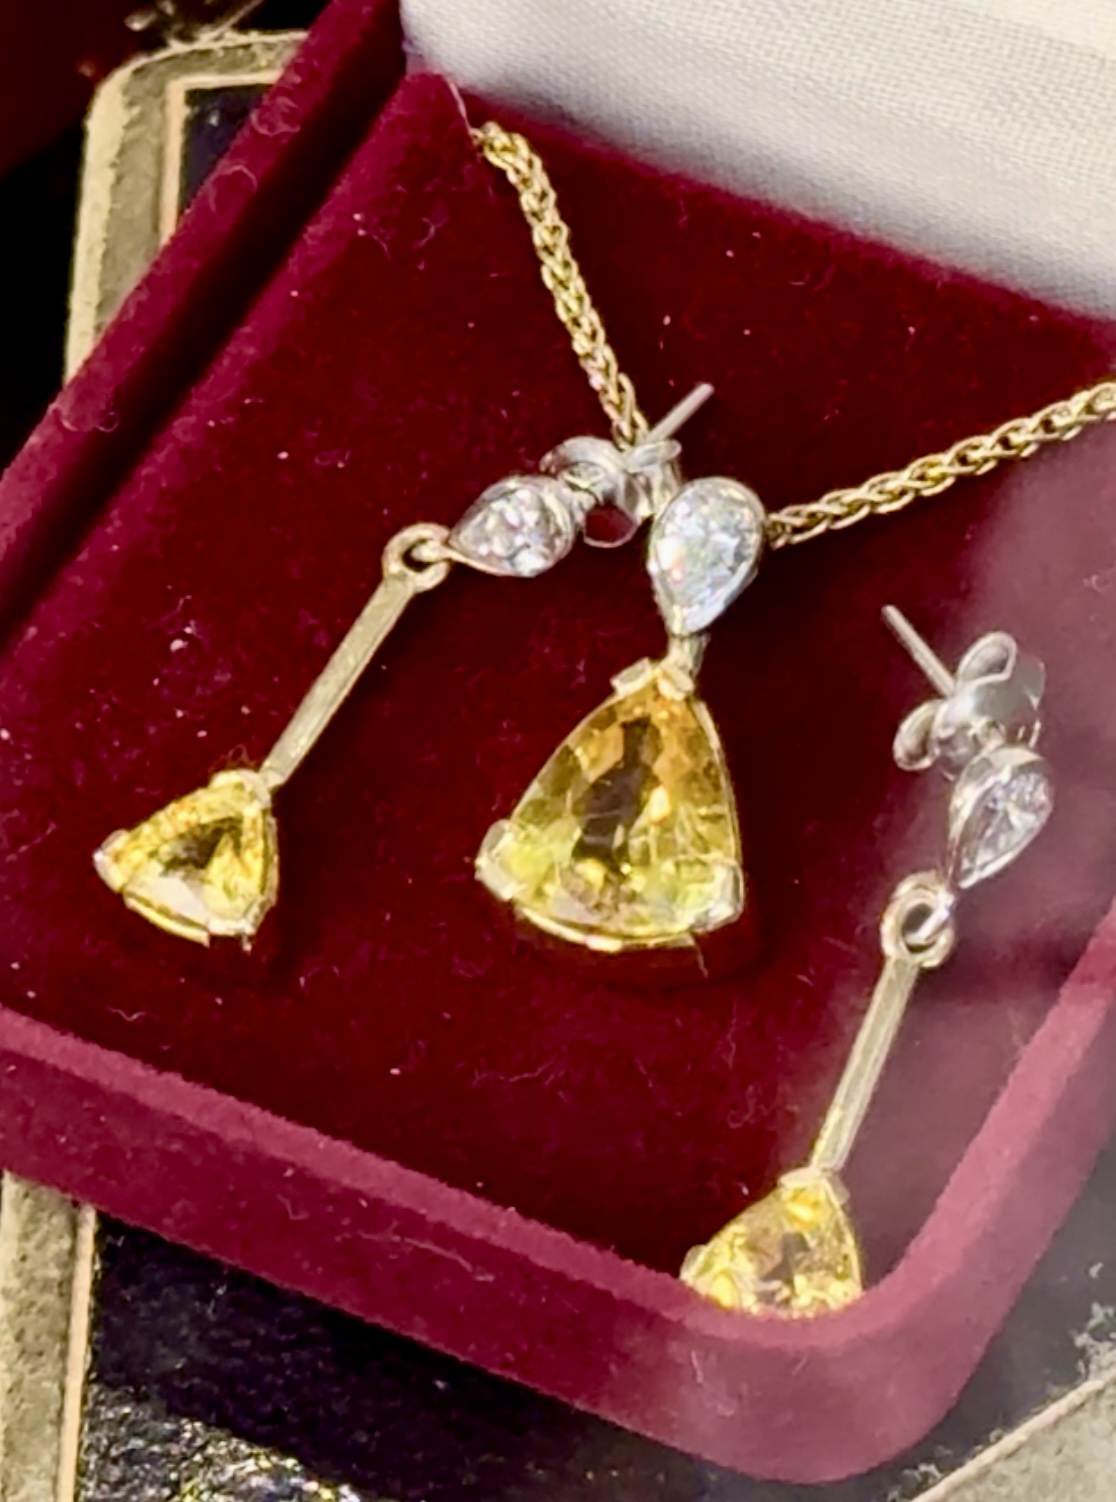 Yellow Sapphire and Diamond Earings and Necklace Pendant 18k Yellow Gold